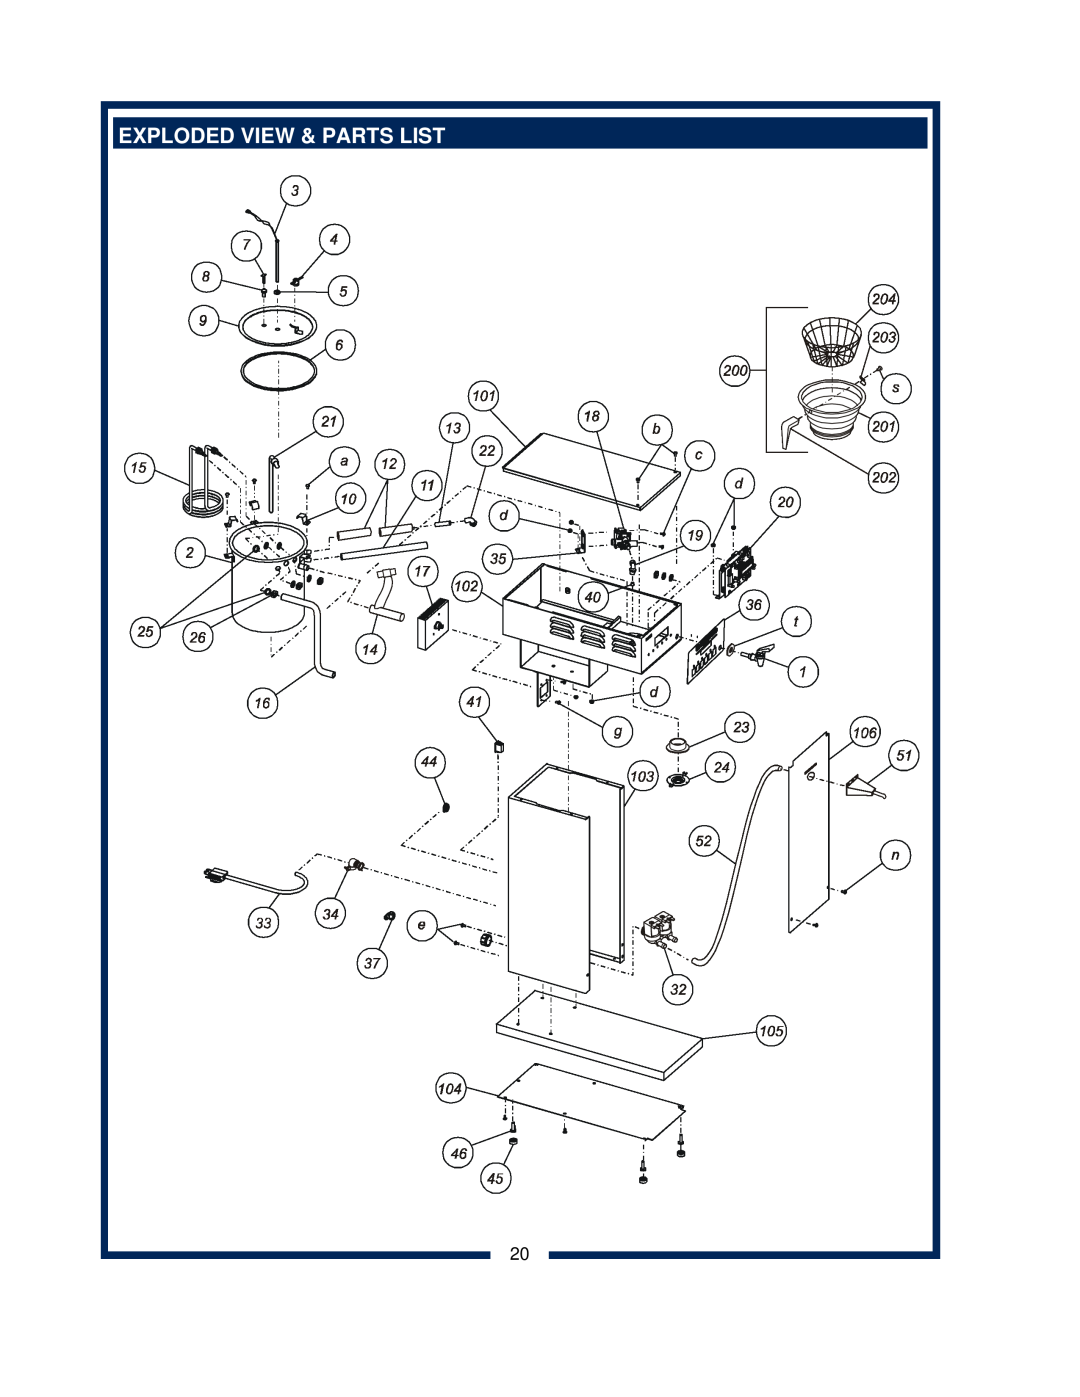 Bloomfield 2030 owner manual Exploded View & Parts List 